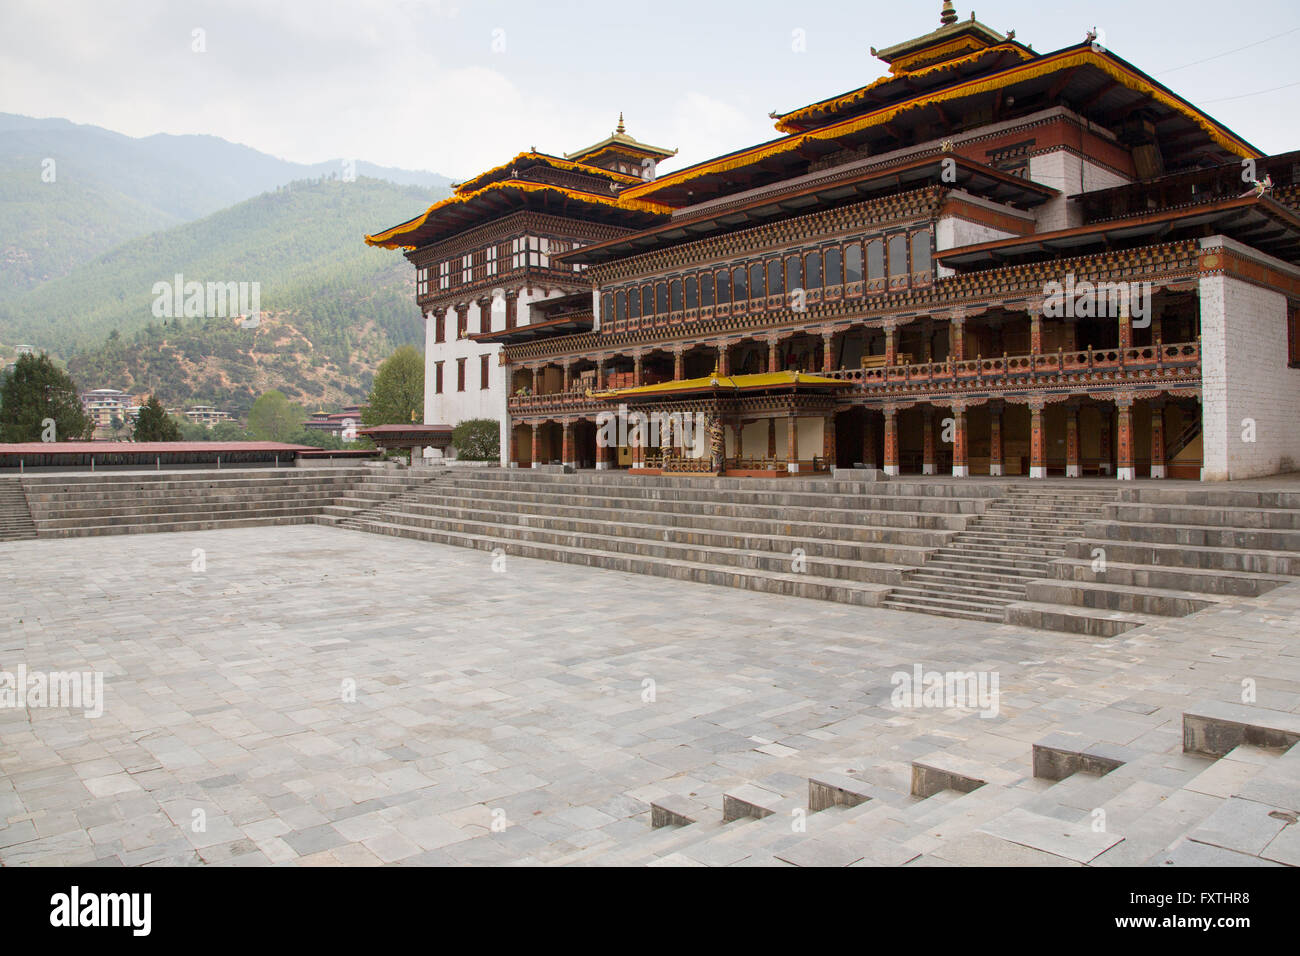 Tashichhoedzong བཀྲ་ཤིས་ཆོས་རྫོང is a Buddhist monastery and fortress on the northern edge of the city of Thimpu in Bhutan Stock Photo